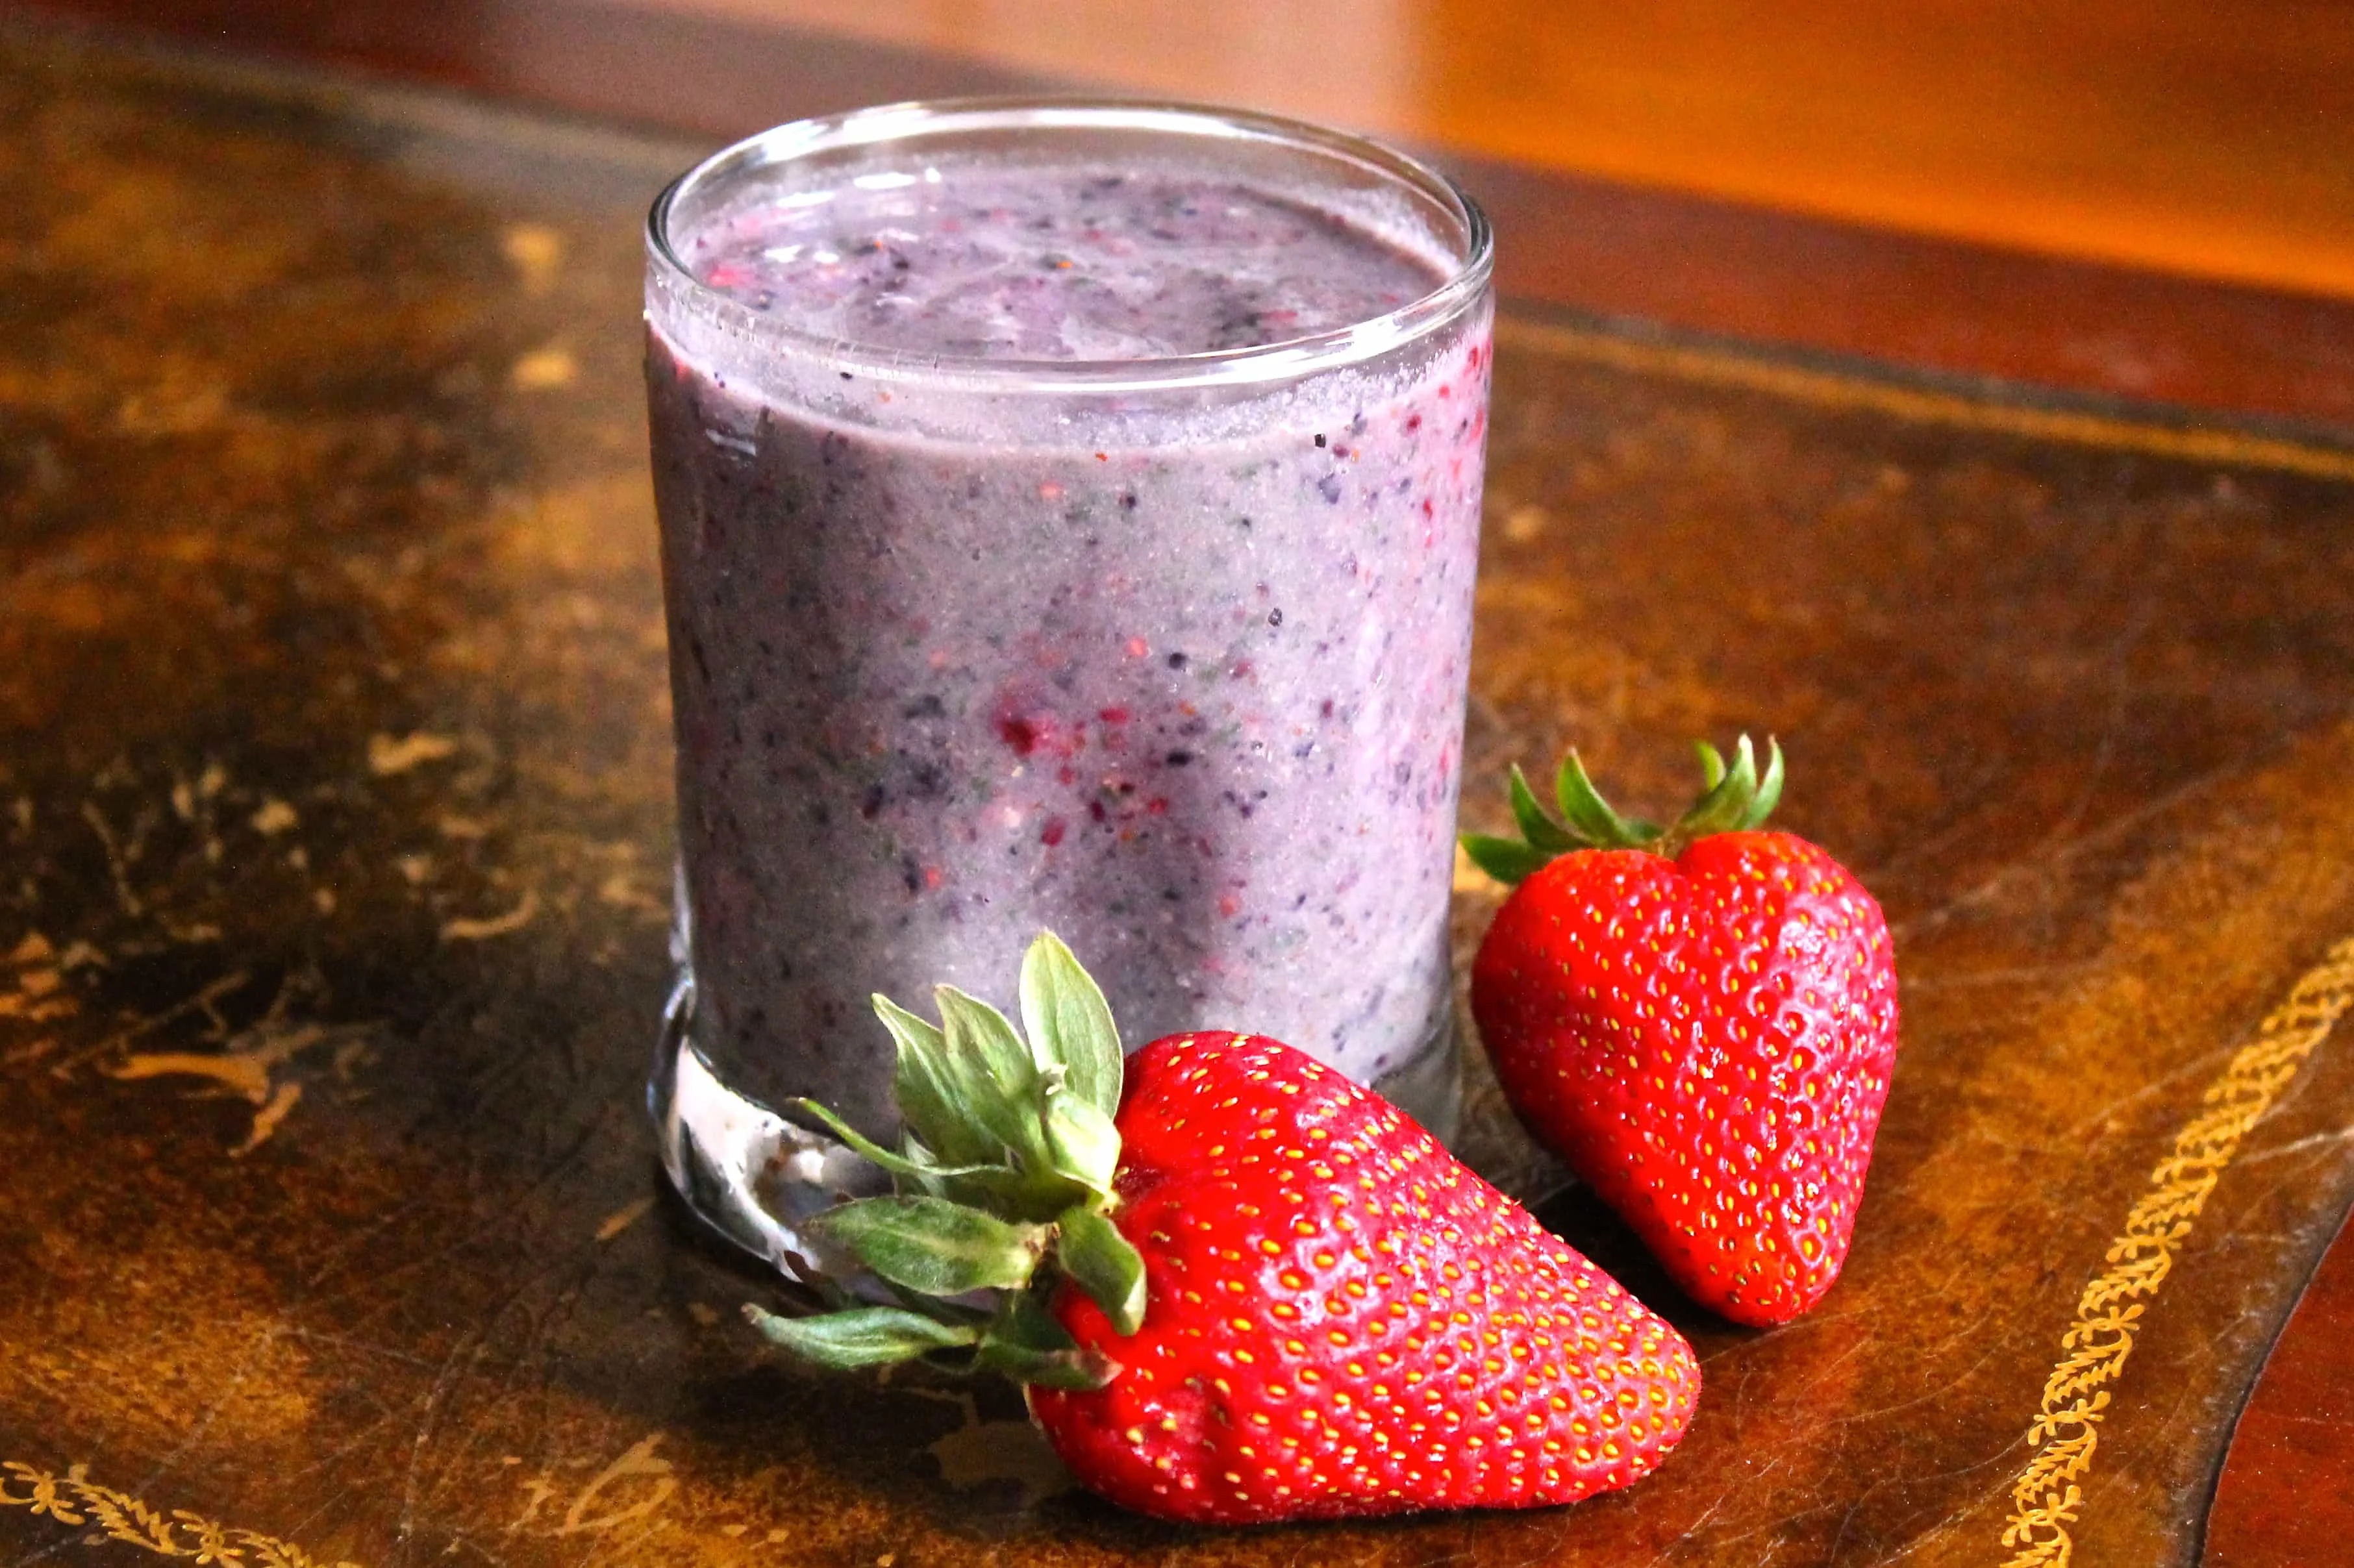 MY FAVORITE BERRY BANANA PROTEIN SMOOTHIE